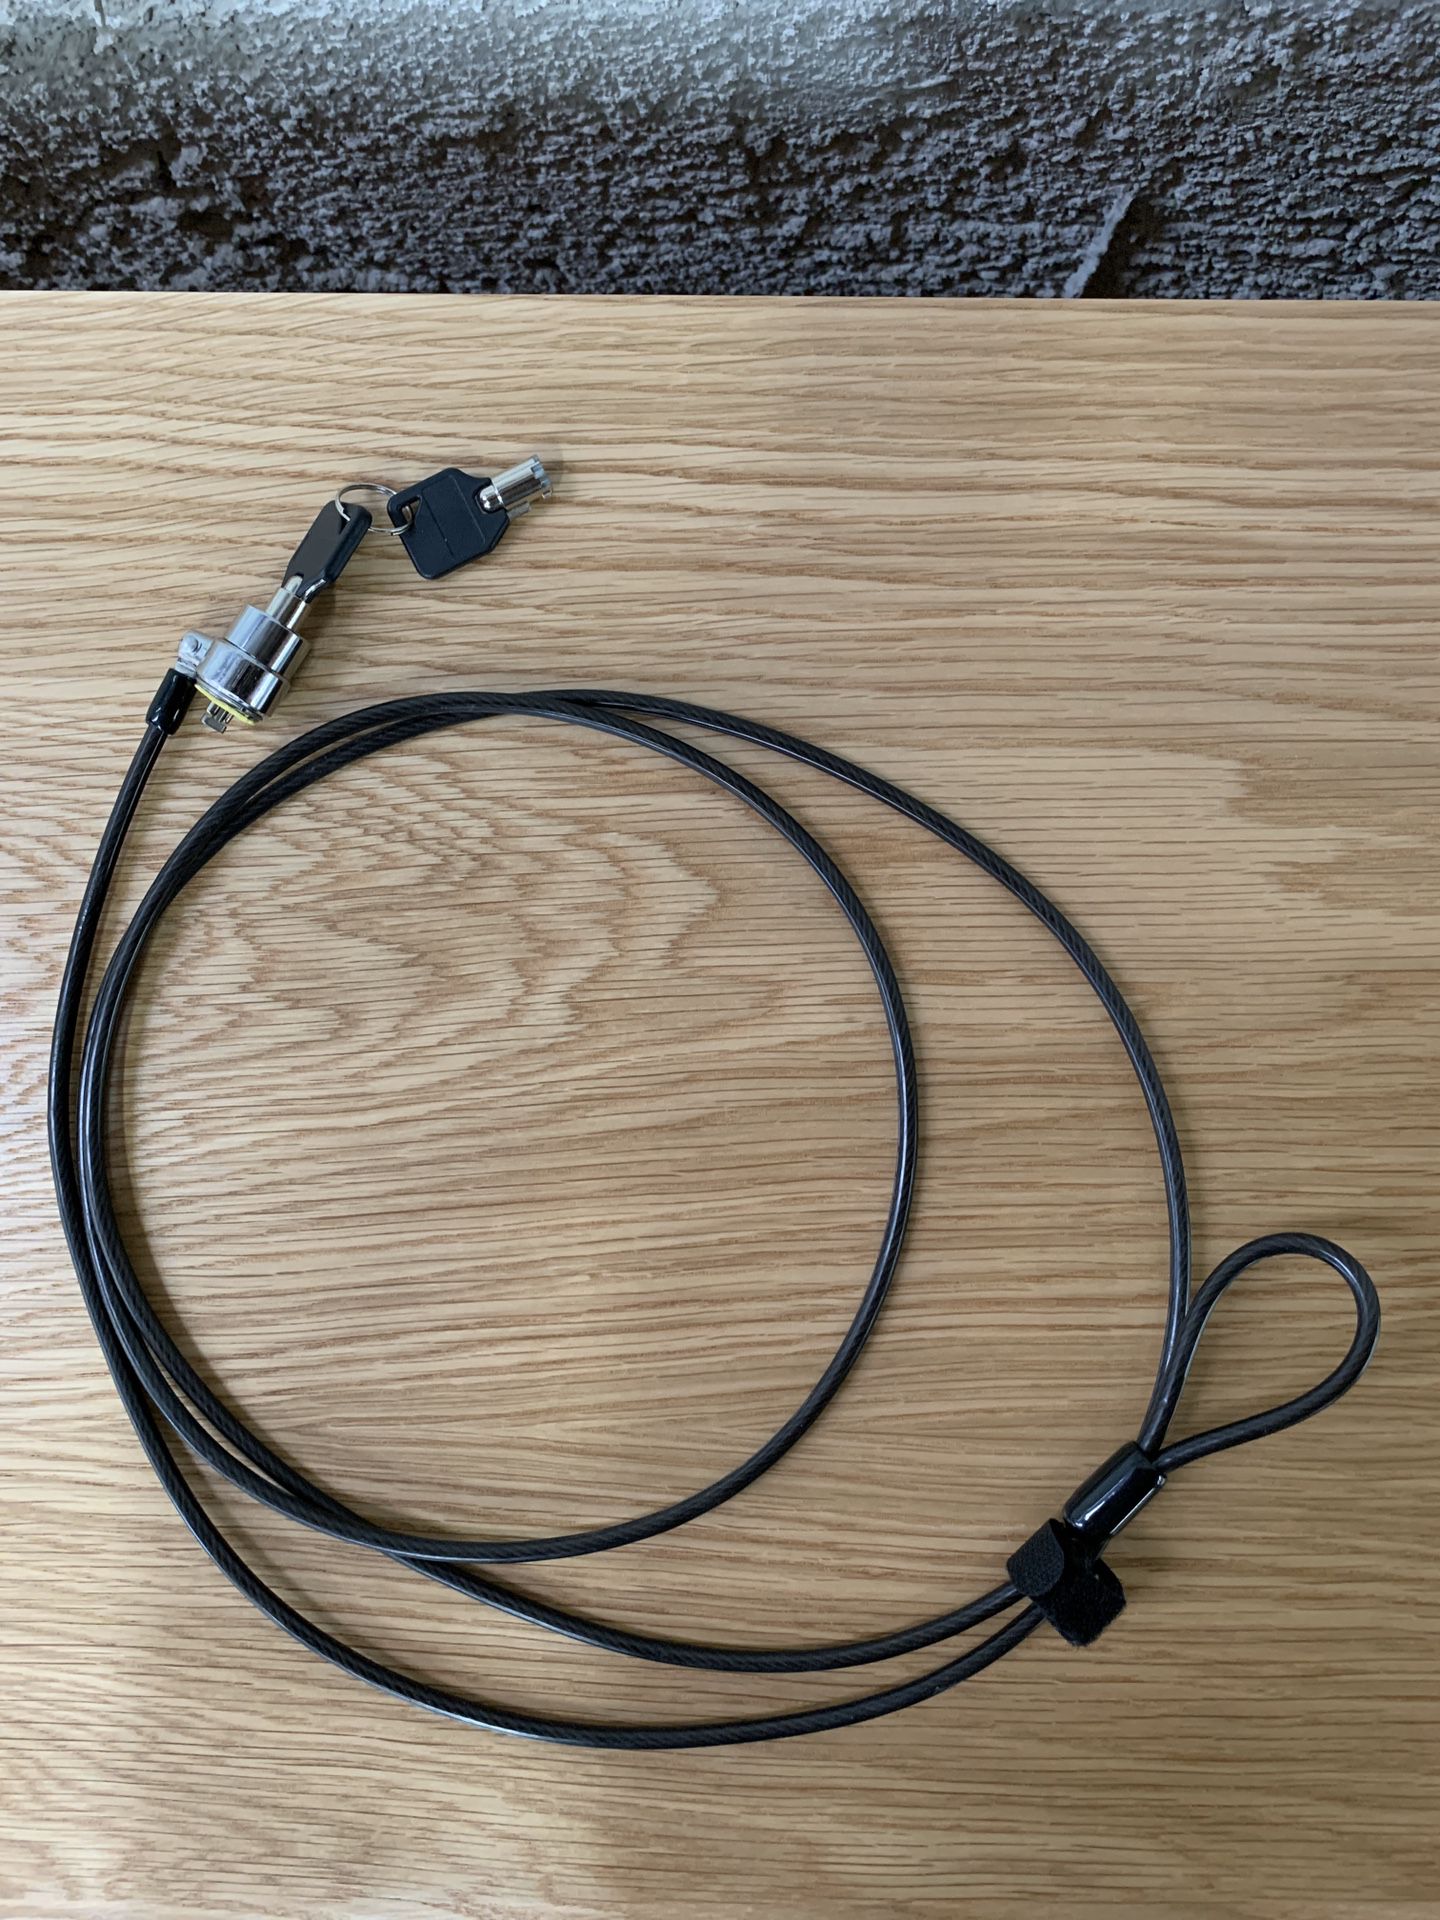 PC LAPTOP security cable with lock BARELY USED